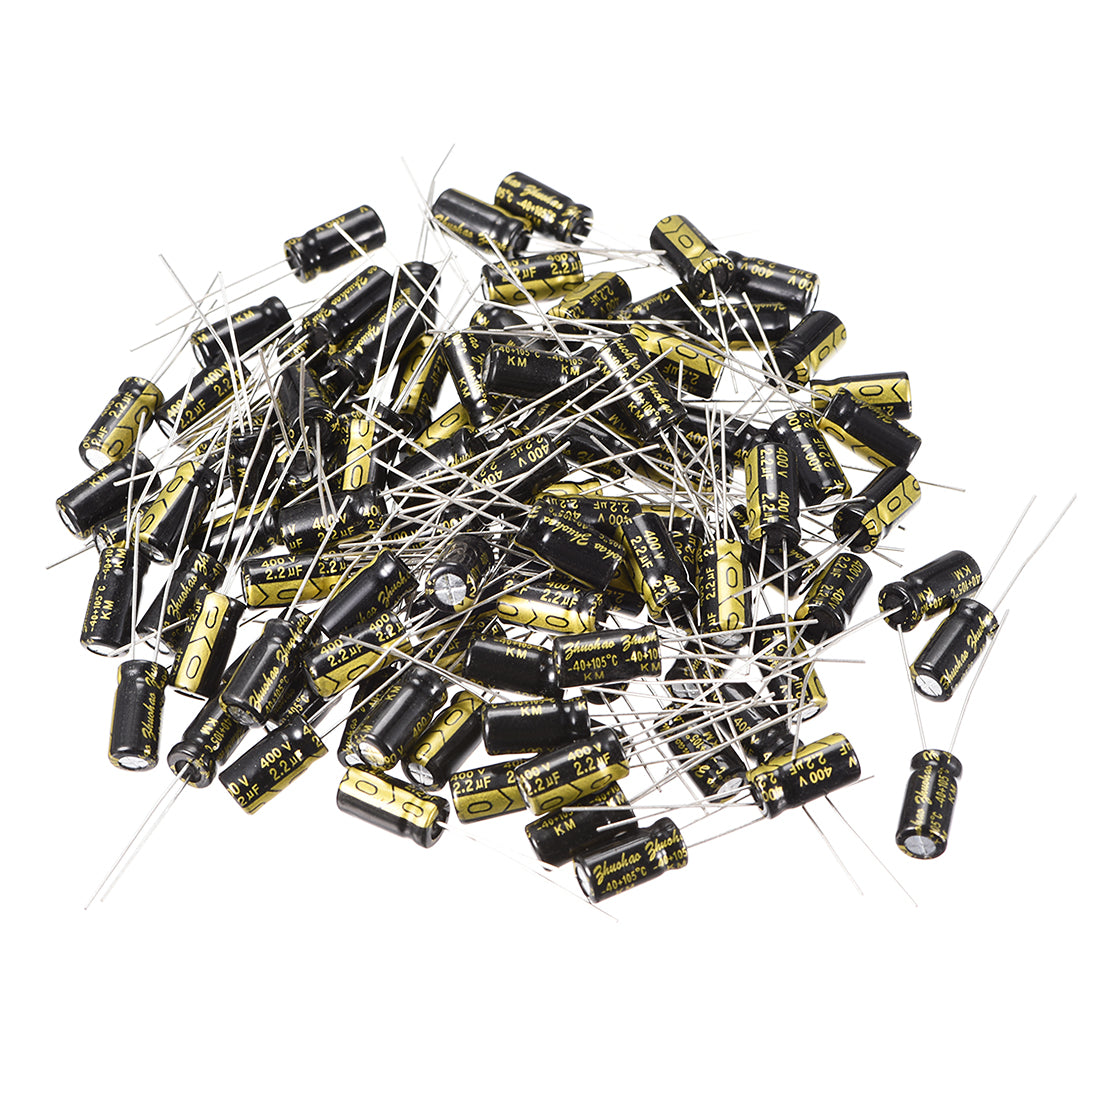 uxcell Uxcell Aluminum Radial Electrolytic Capacitor with 2.2uF 400V 105 Celsius Life 2000H 6 x 12 mm Black 100pcs